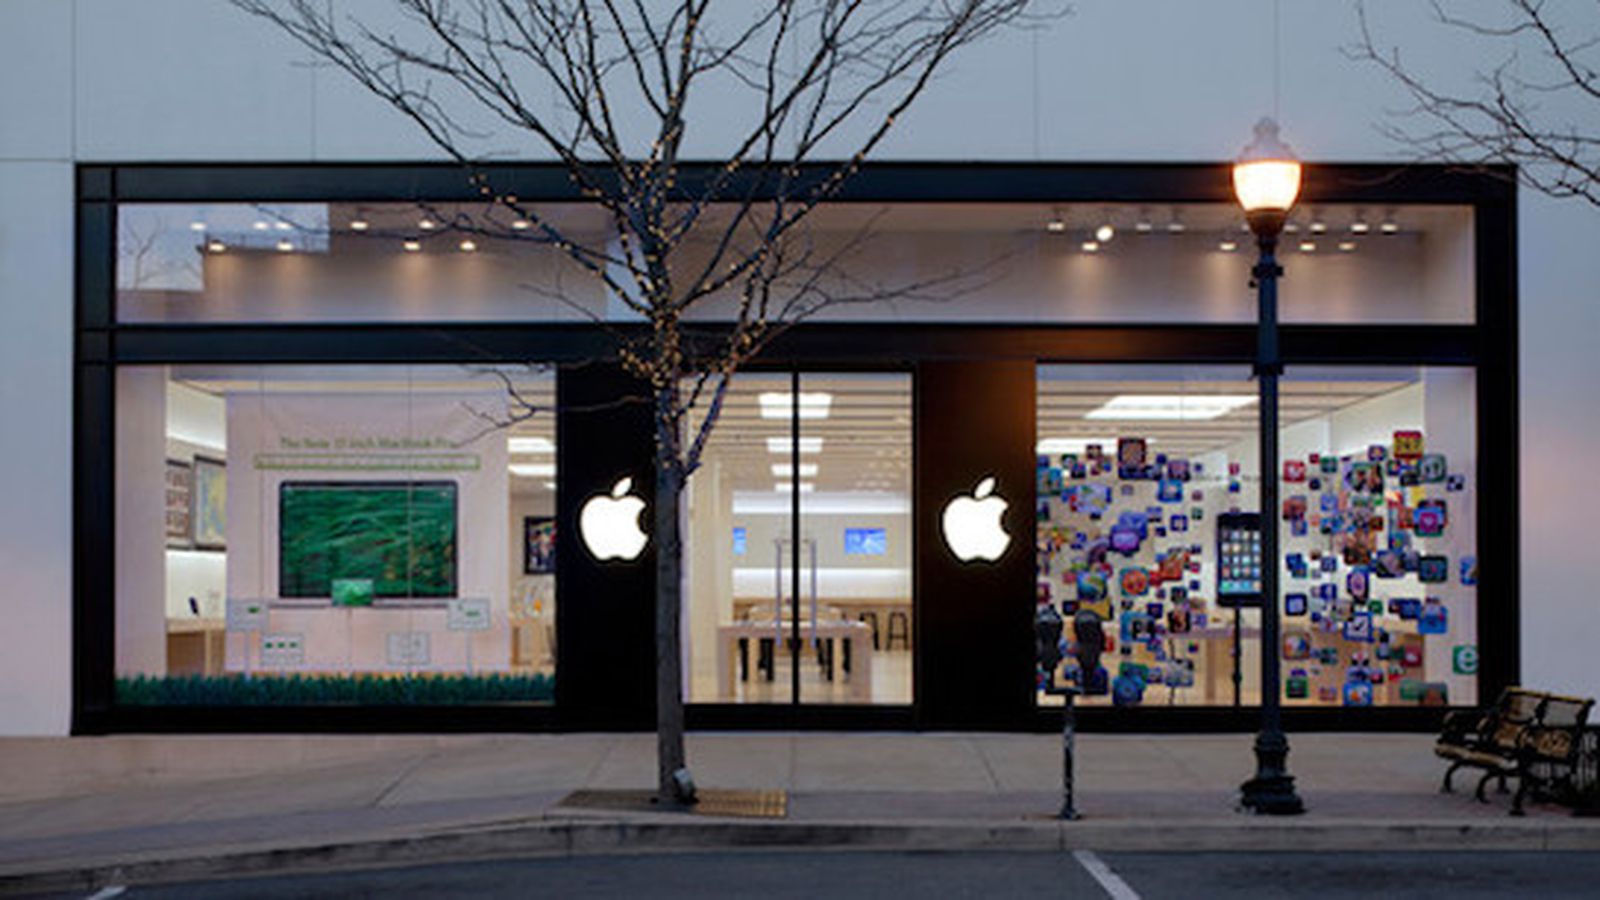 13 Apple Stores in US malls could reopen by May 2